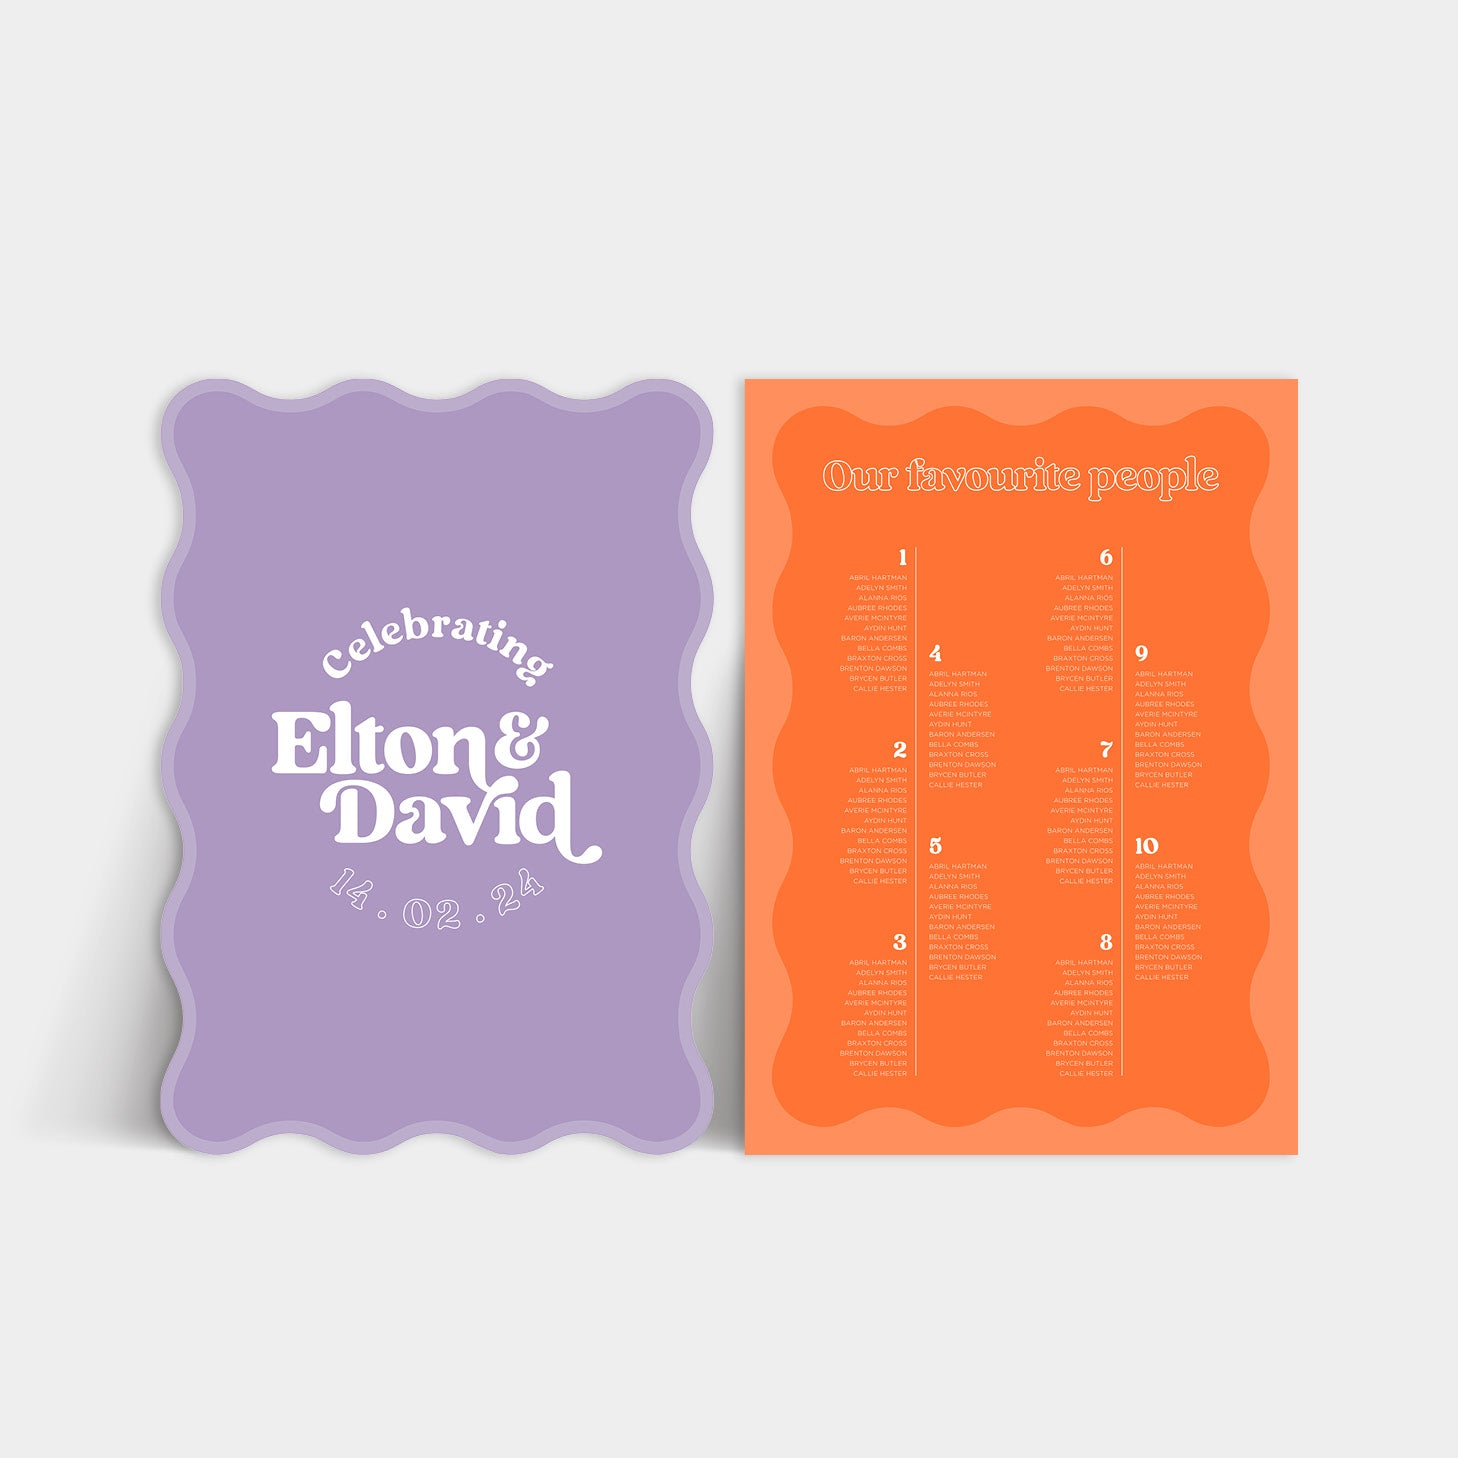 ELTON DUO SIGN PACKAGE